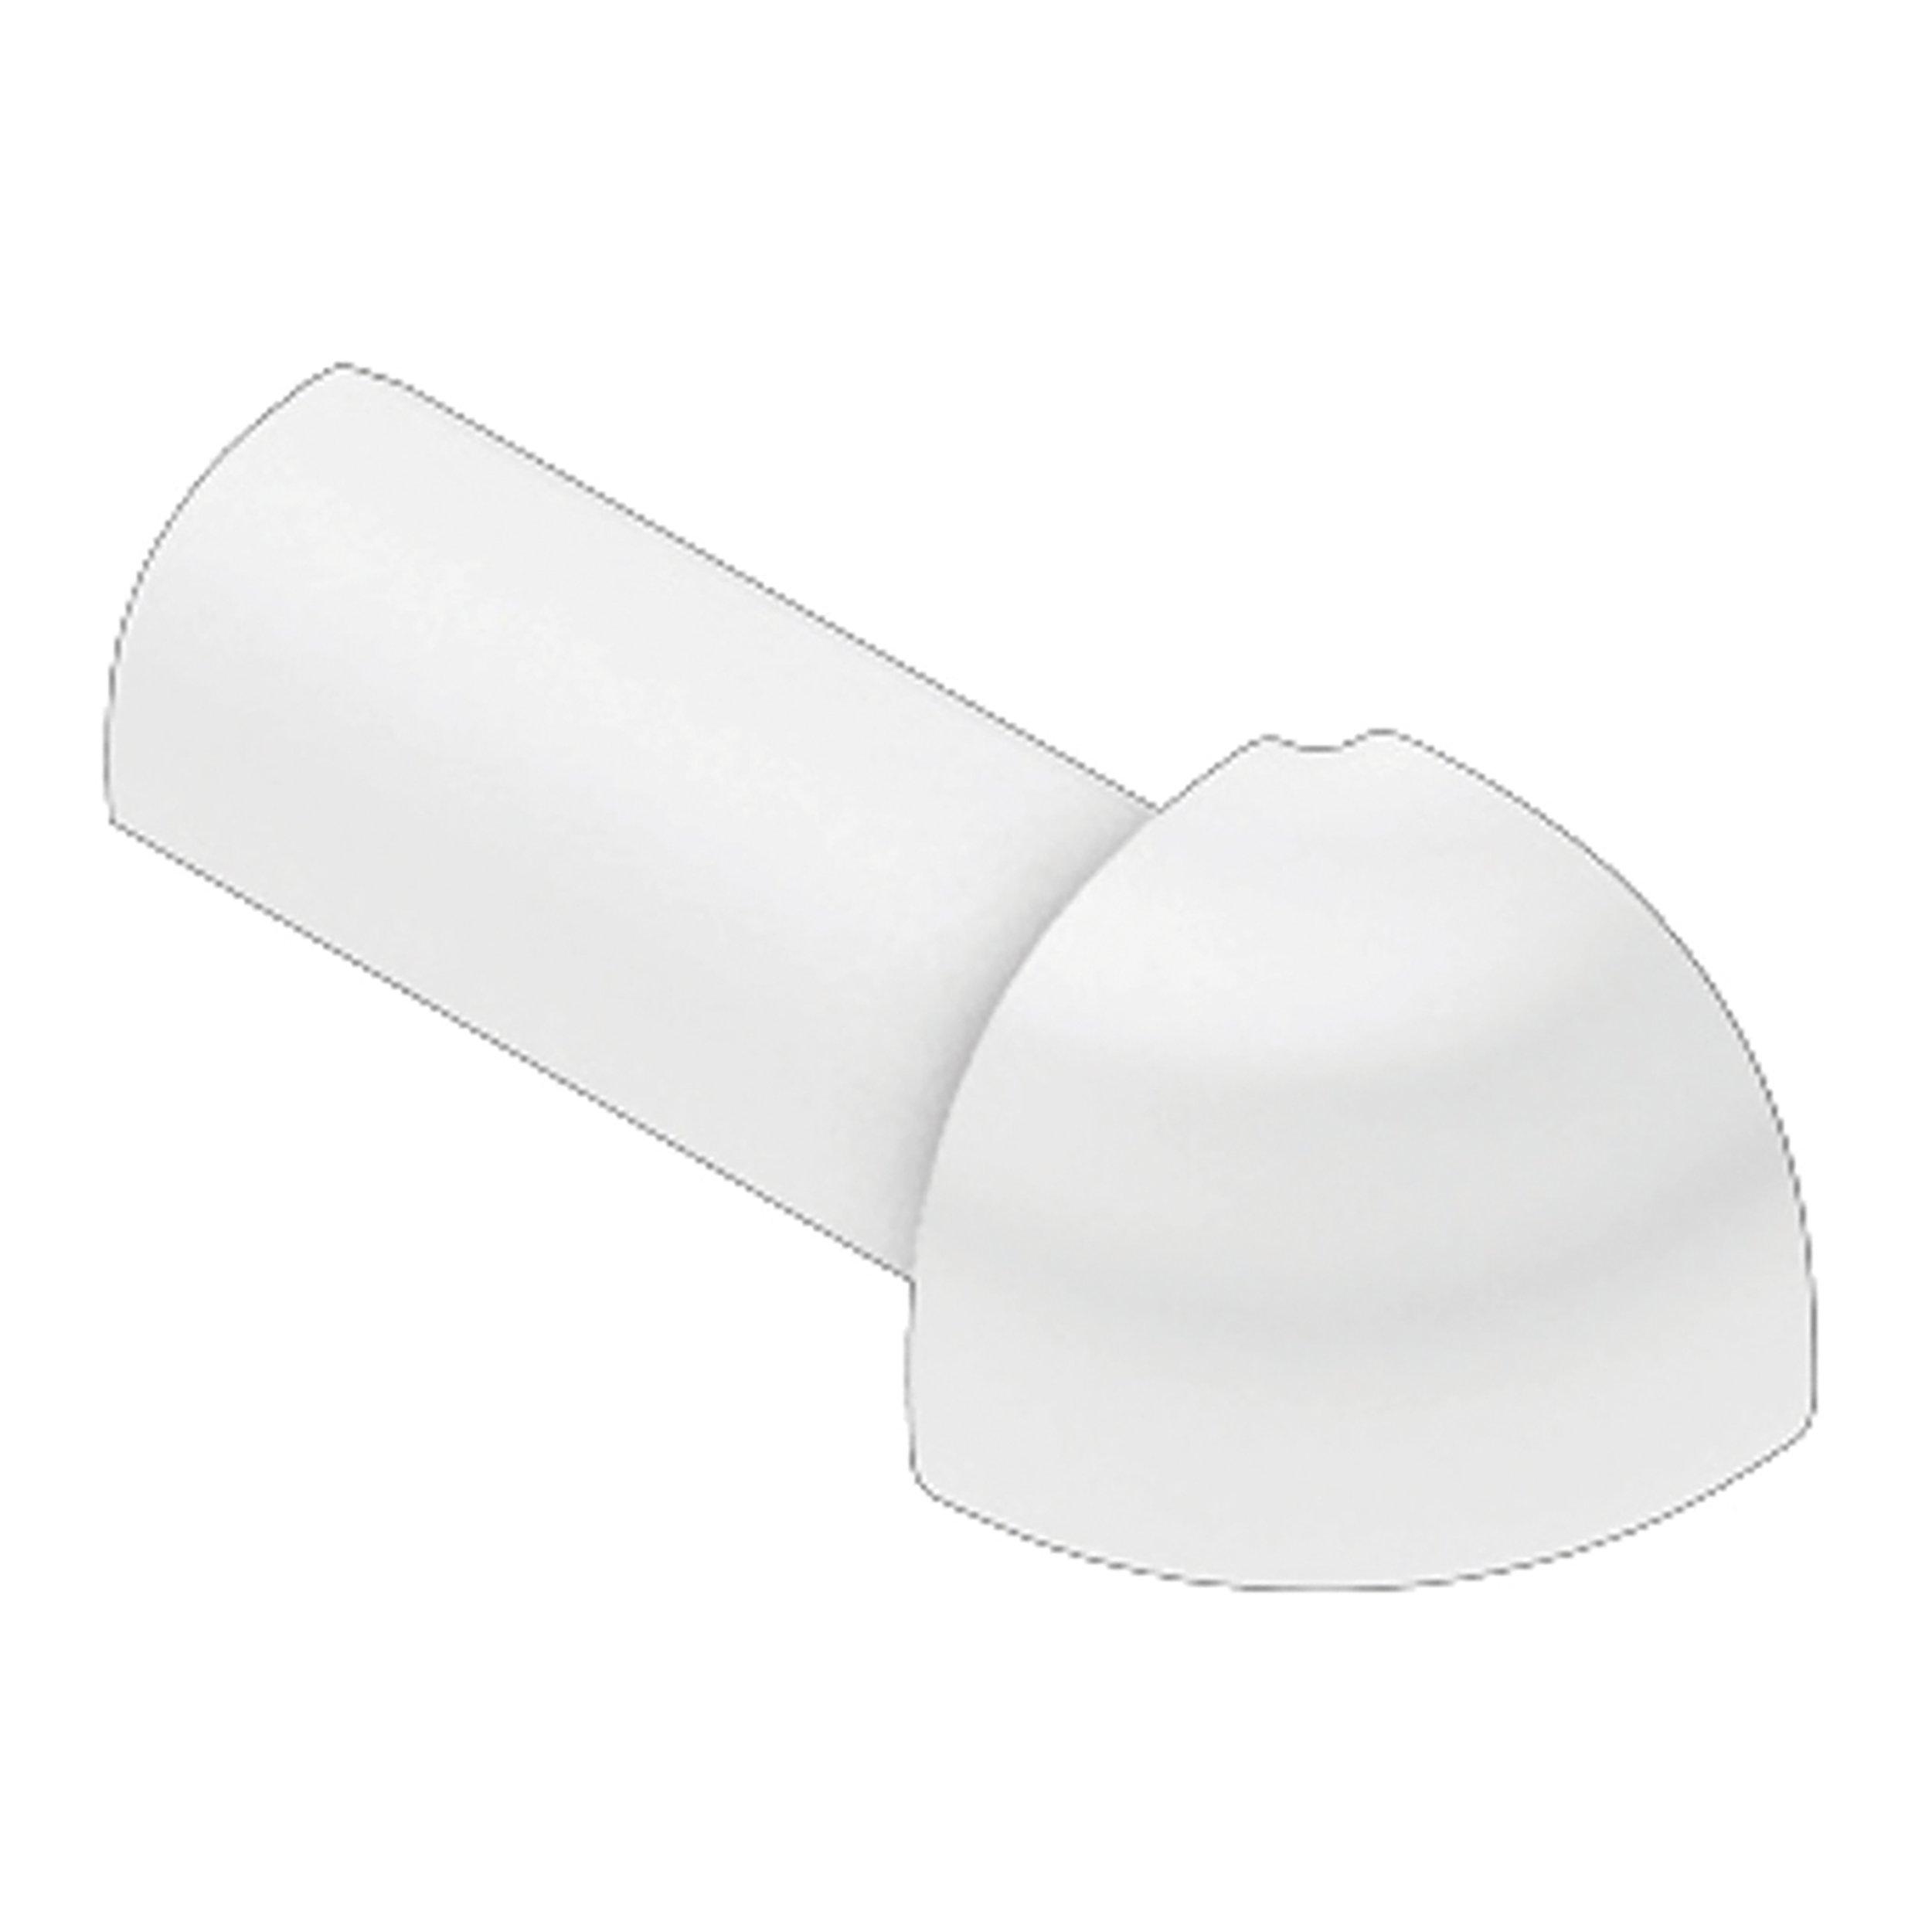 Schluter Rondec Out Corner 7/16 in. PVC Bright White